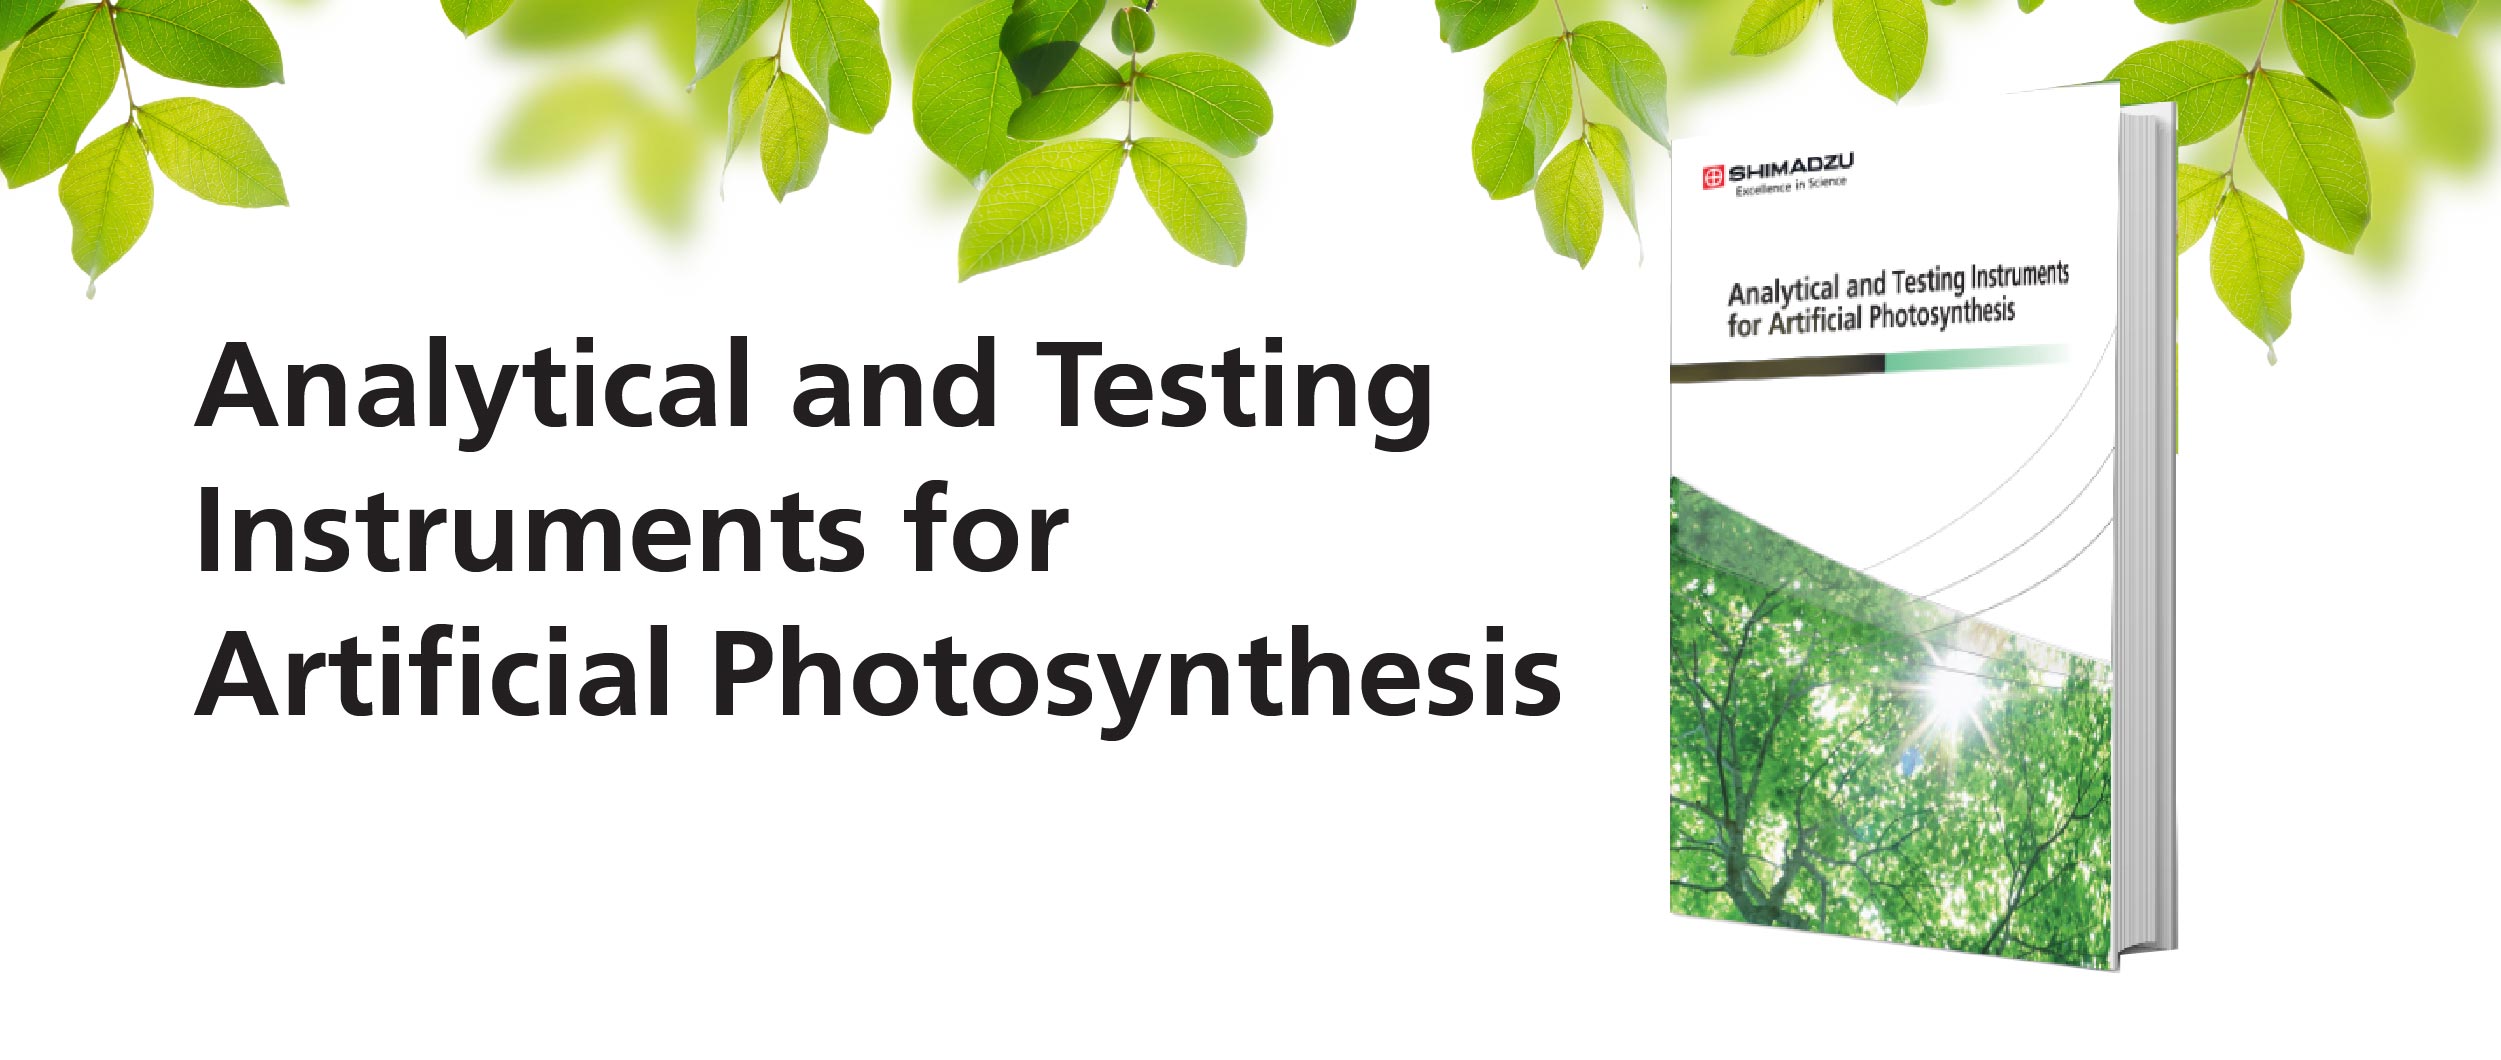 Analytical and Testing Instruments for Artificial Photosynthesis